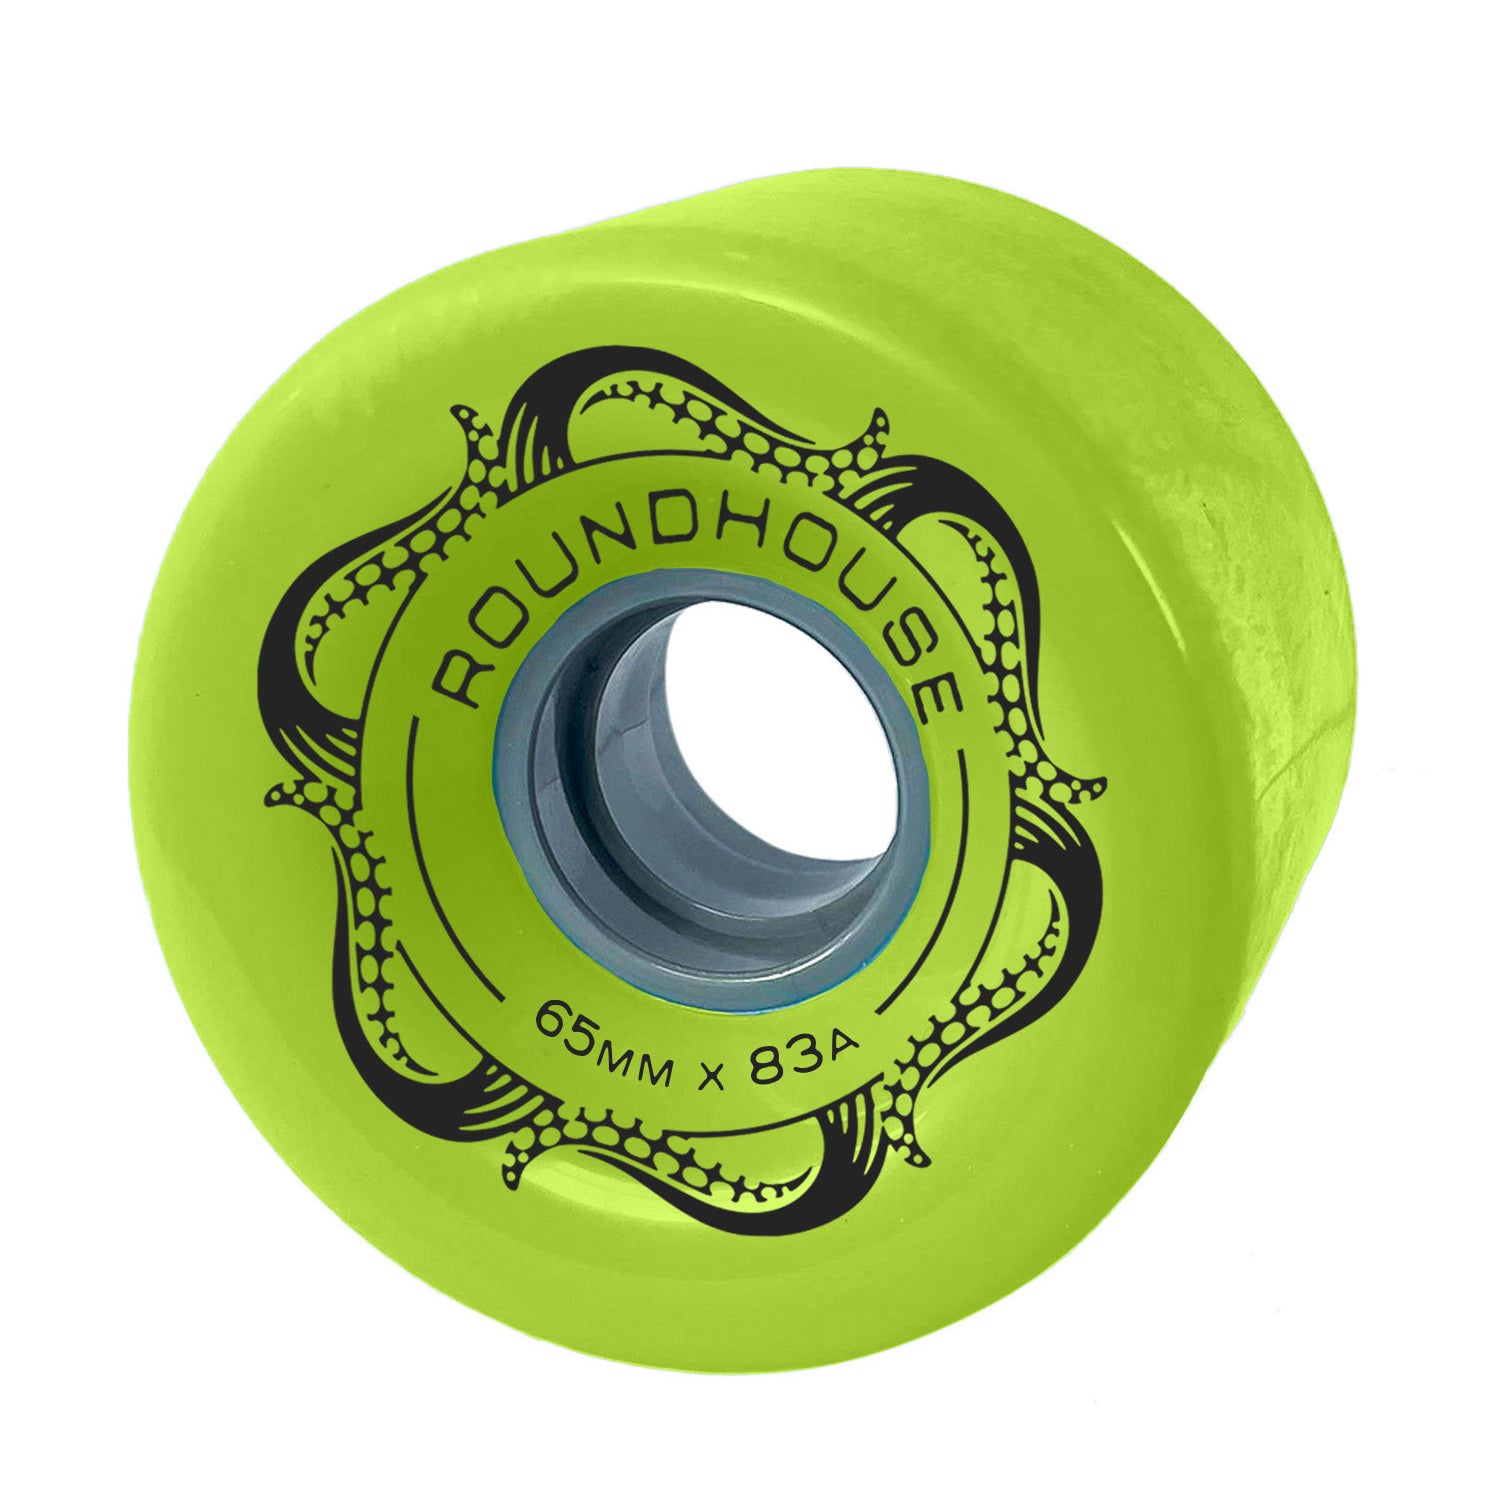 Roundhouse Wheels - 65mm Slick - Green Glo (83A)